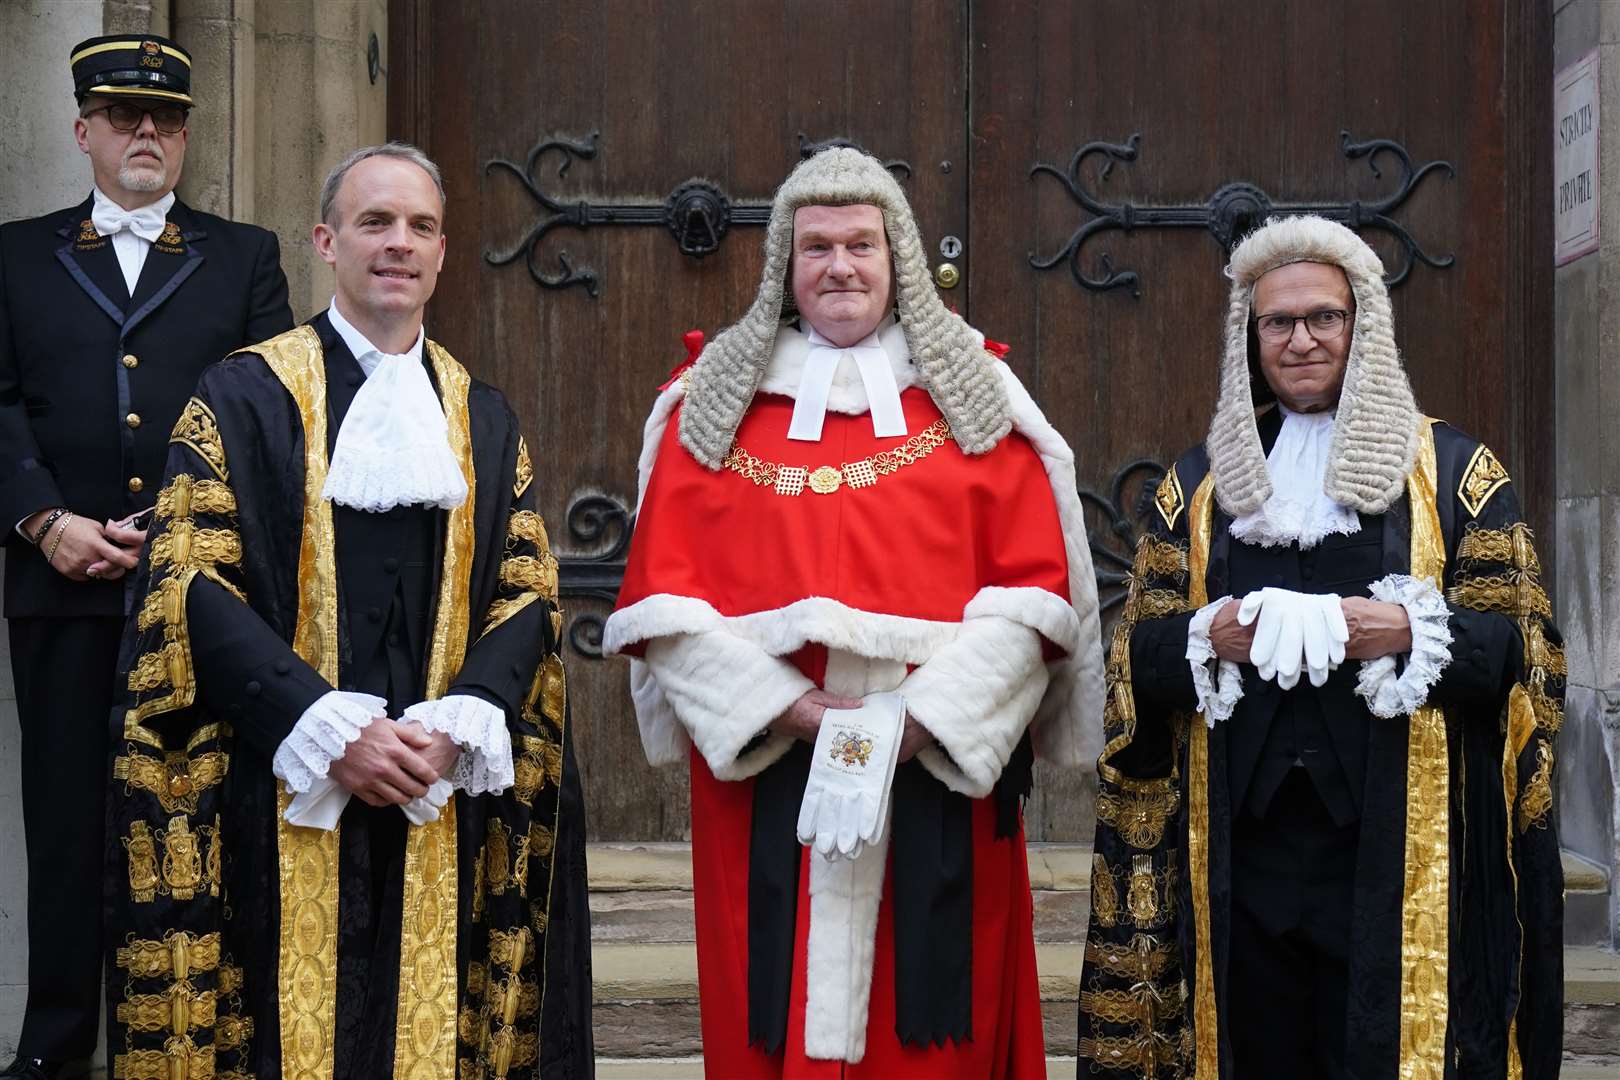 The new Lord Chancellor Dominic Raab (left) alongside Lord Chief Justice Lord Burnett (centre) and Master of the Rolls Sir Geoffrey Vos (Gareth Fuller/PA)